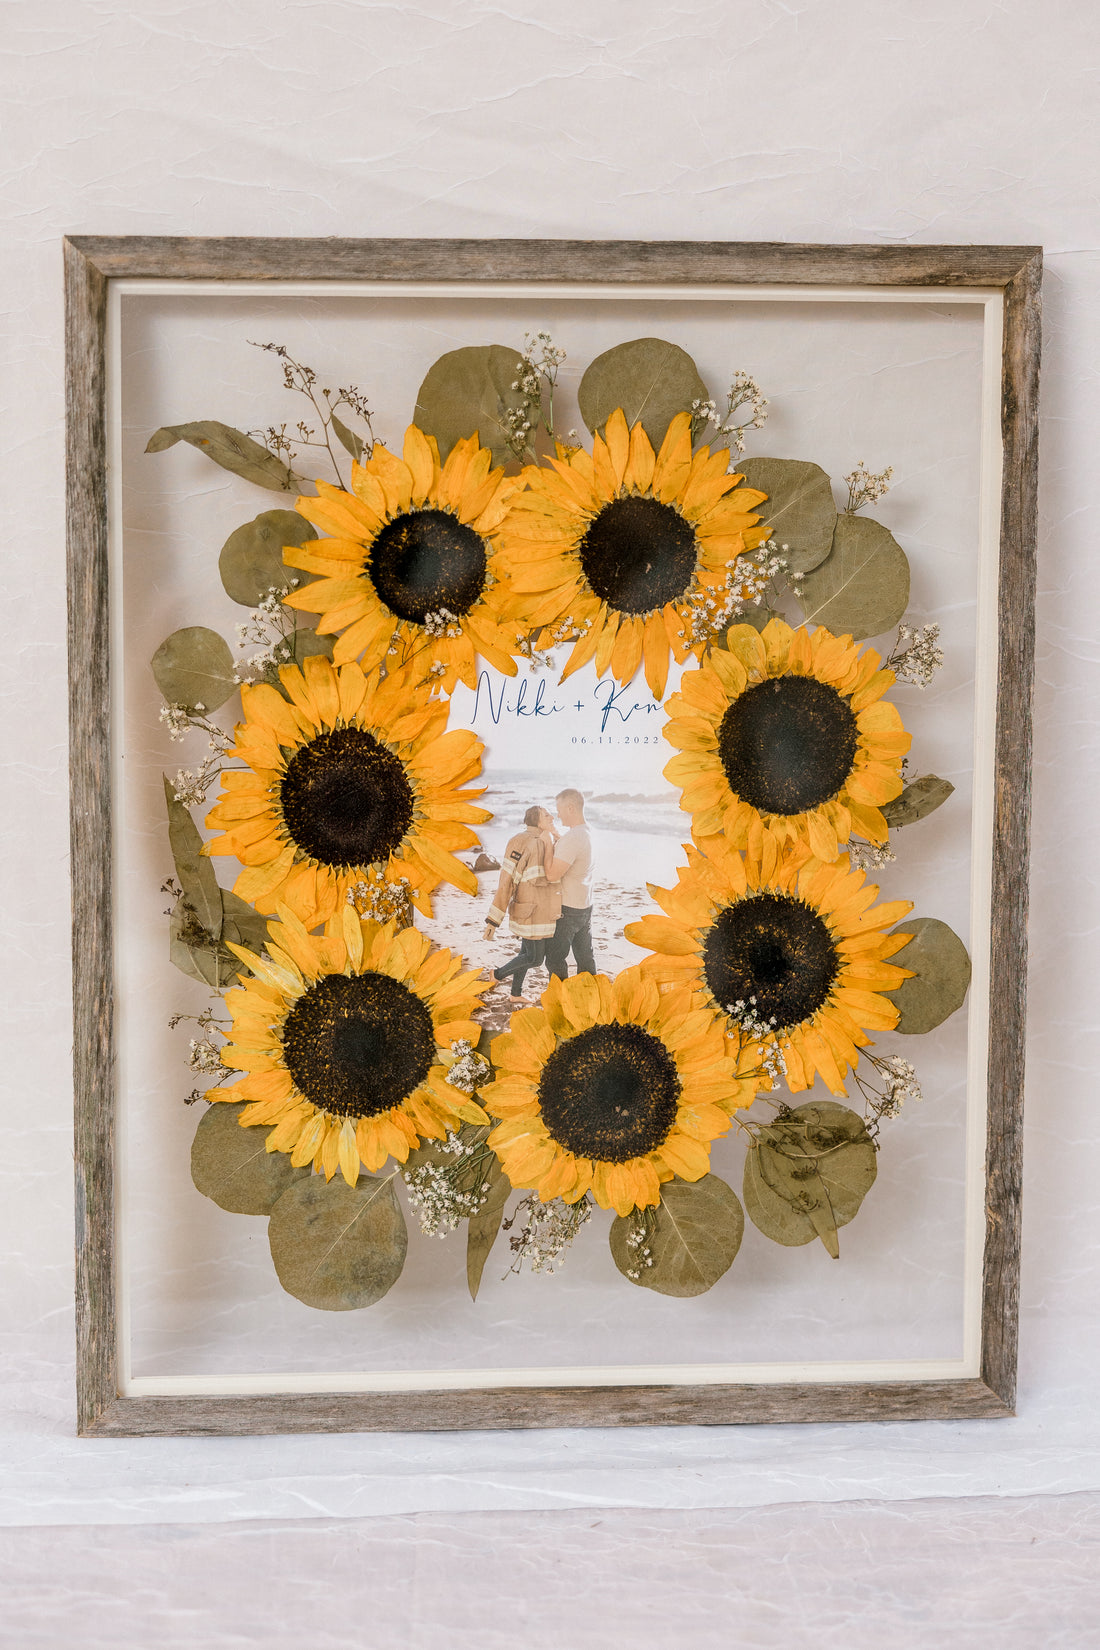 Barn wood frame with pressed sunflowers in burst style design with invitation